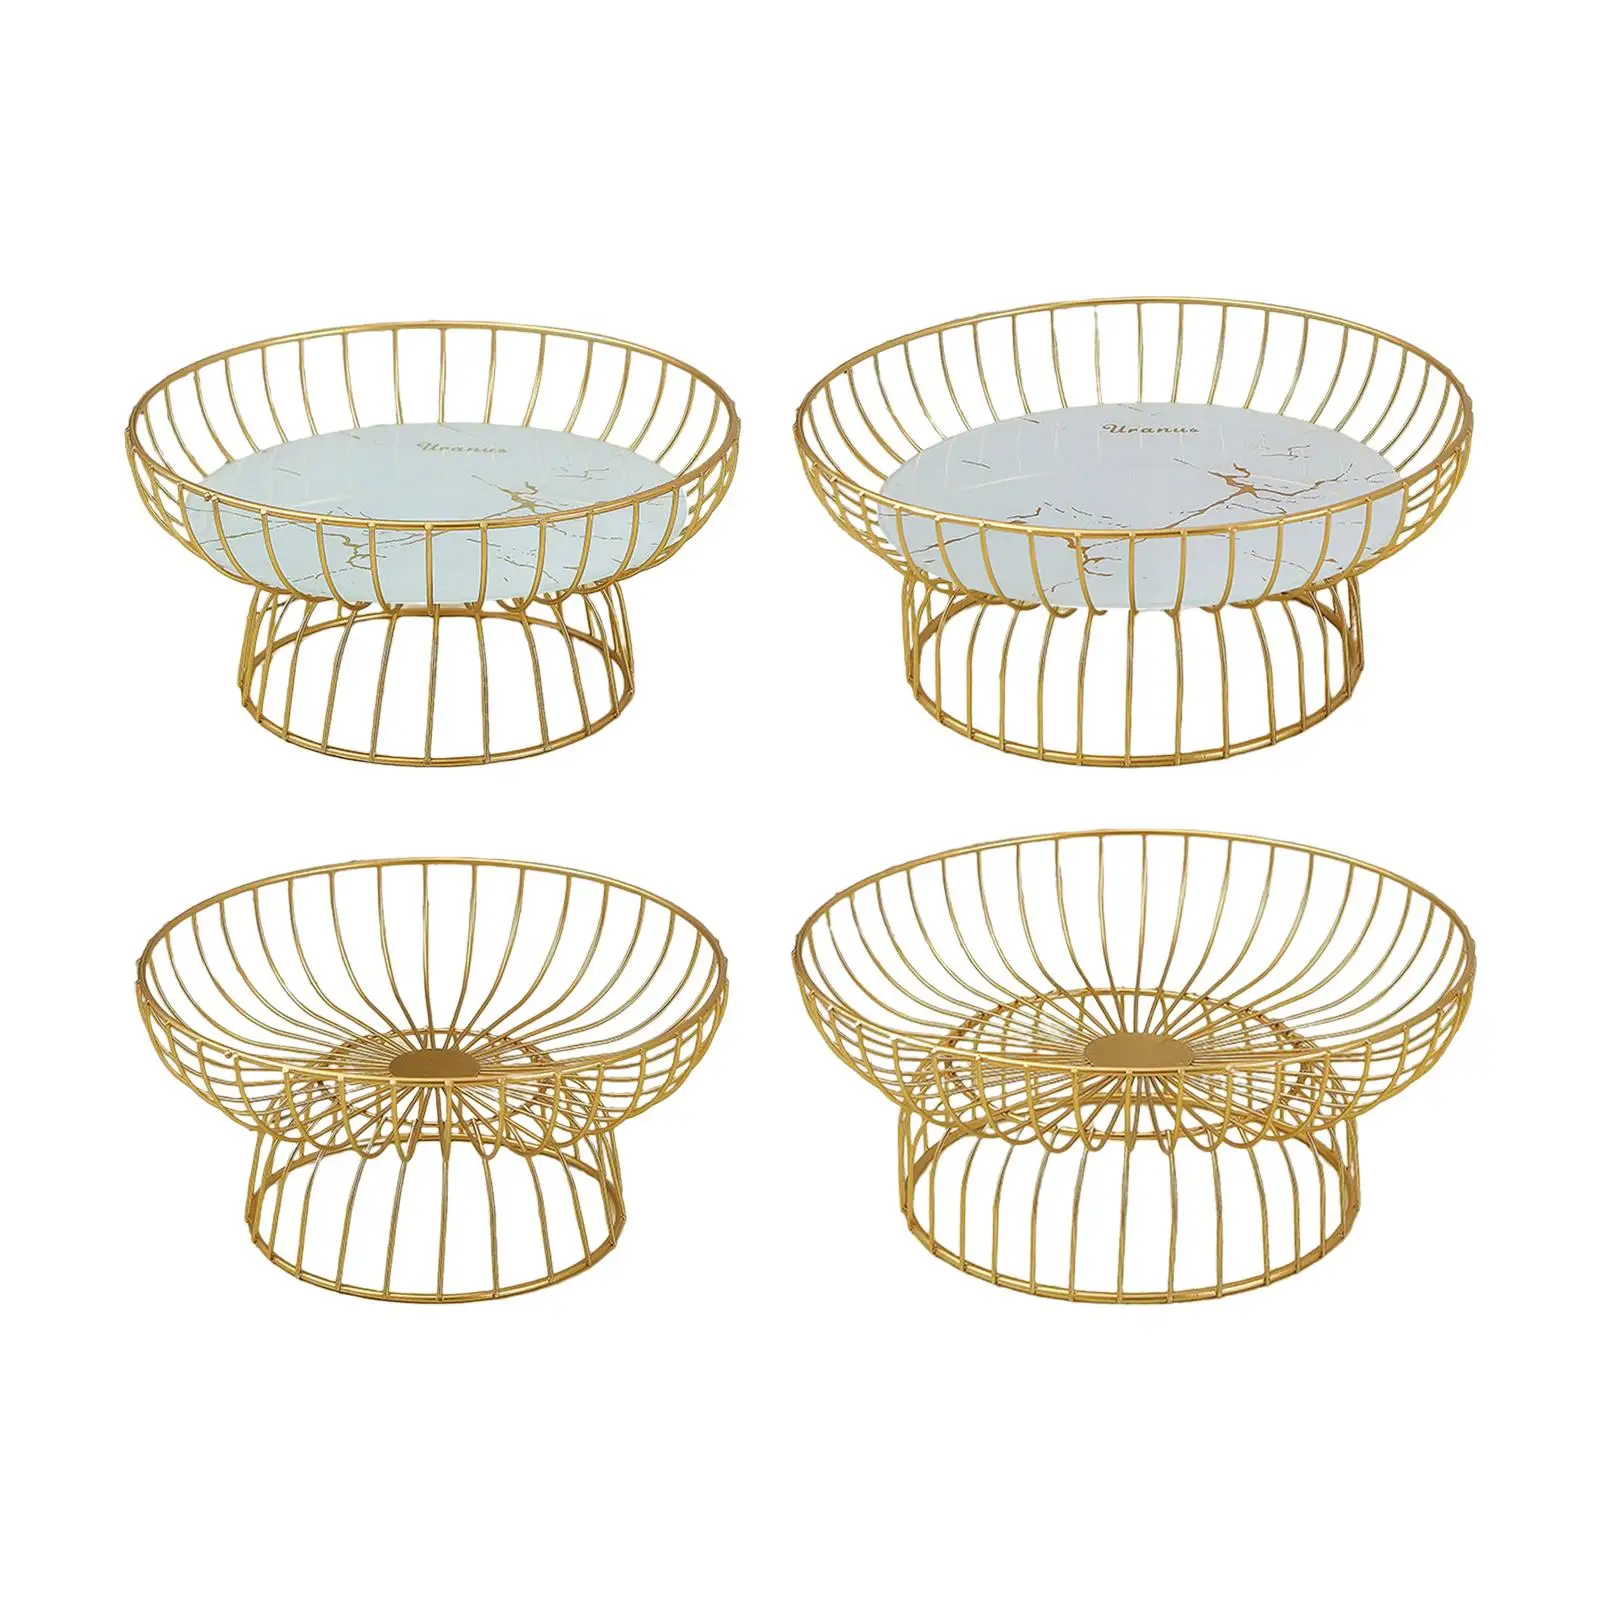 Iron Wire Fruit Basket Serving Bowl Table Centerpiece Single Tier Dish Fruit Bowl for Household Kitchen Counter Cabinet